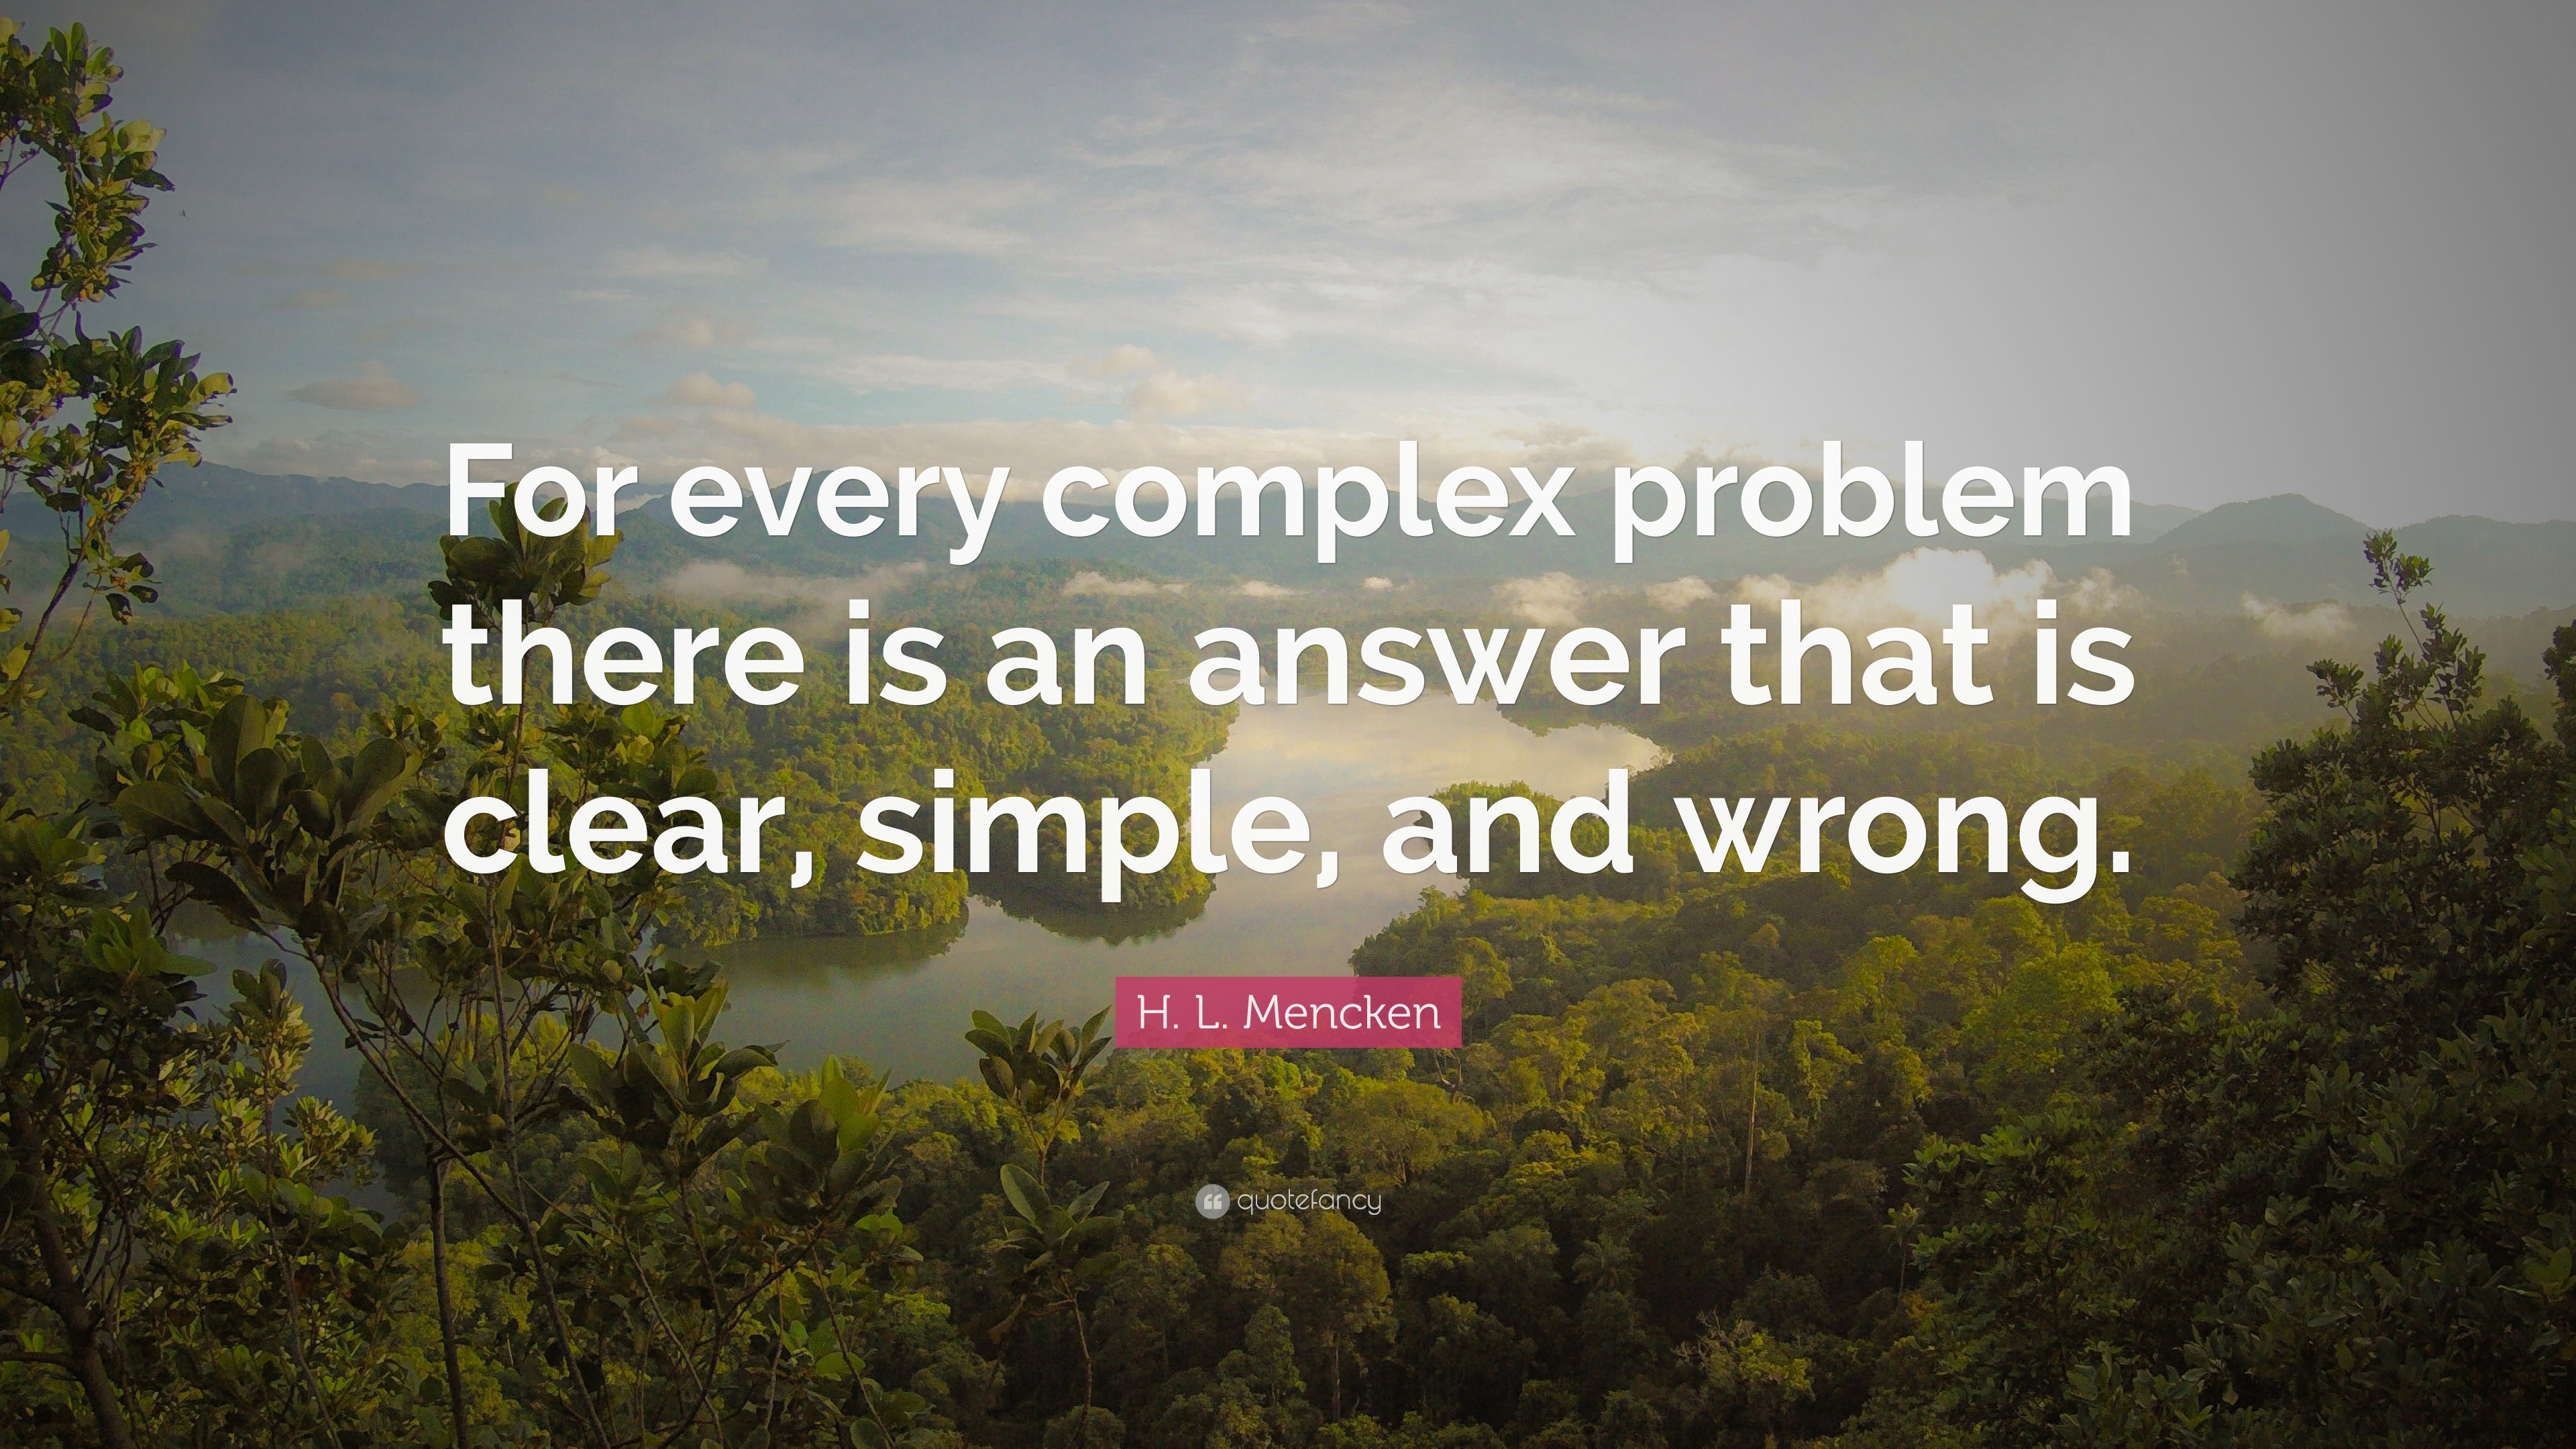 H. L. Mencken Quote: “For every complex problem there is an answer that